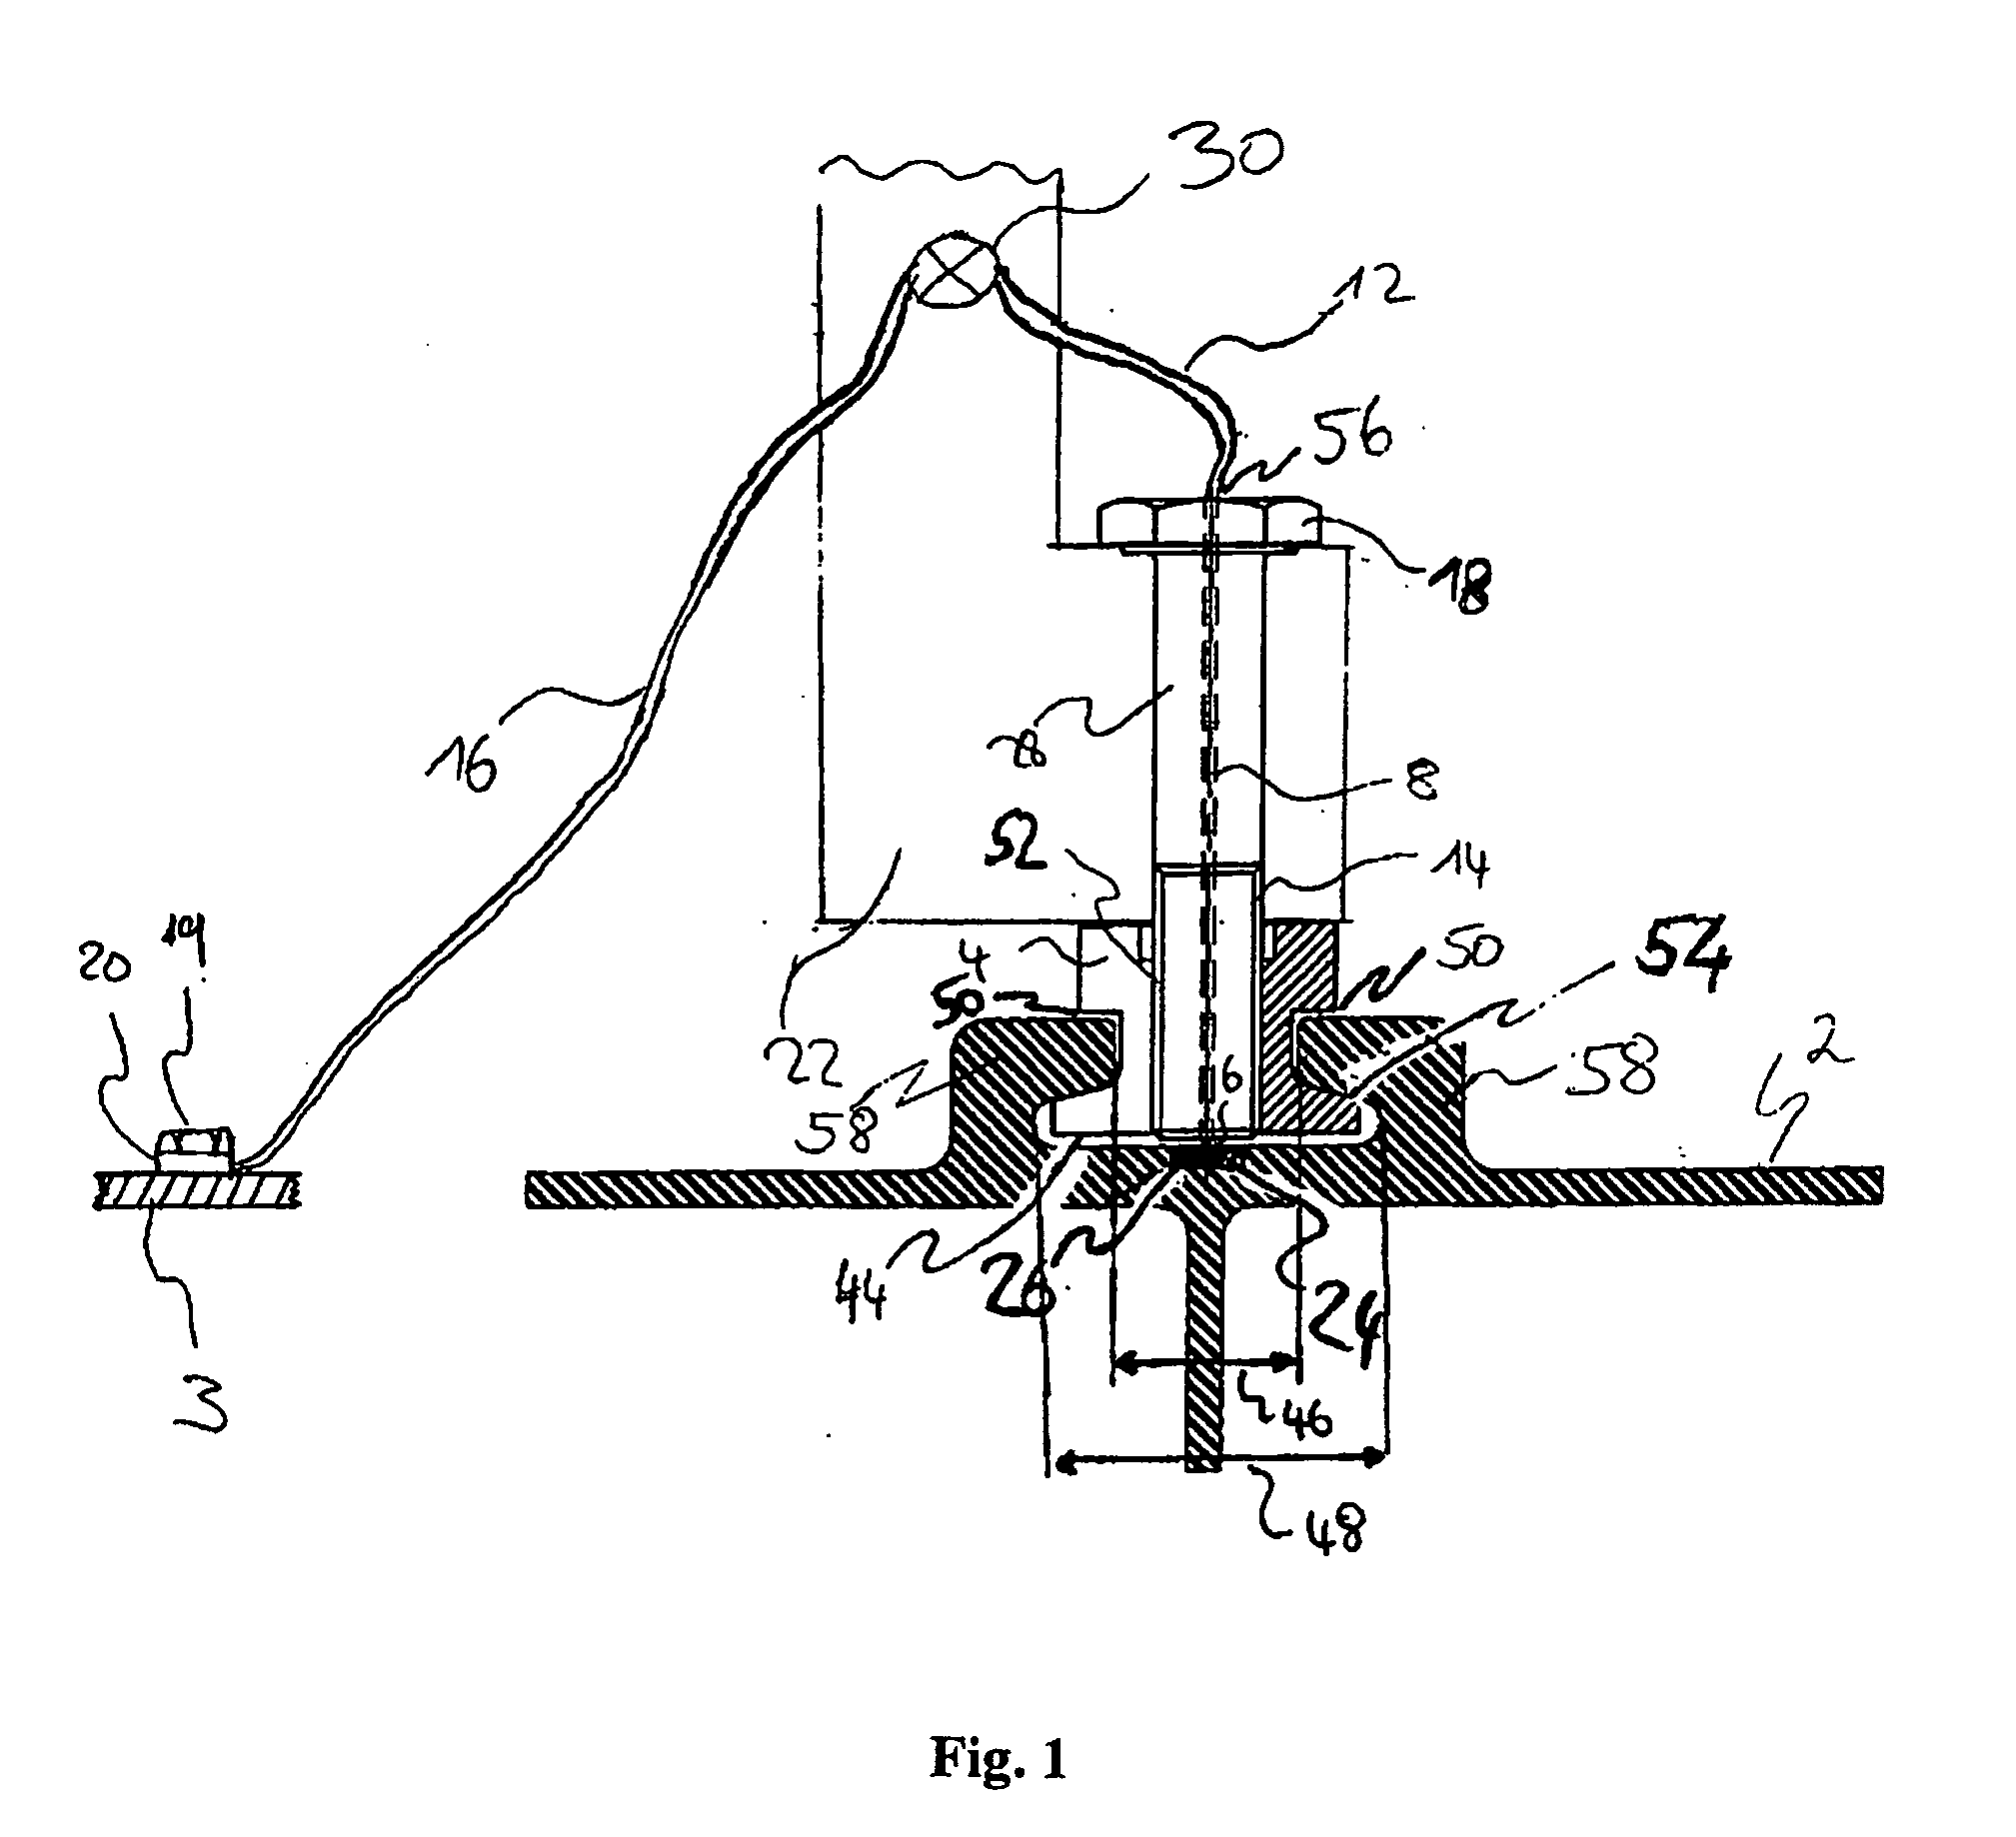 Power distribution system for supplying a rail-mounted monument in an aircraft with electric power